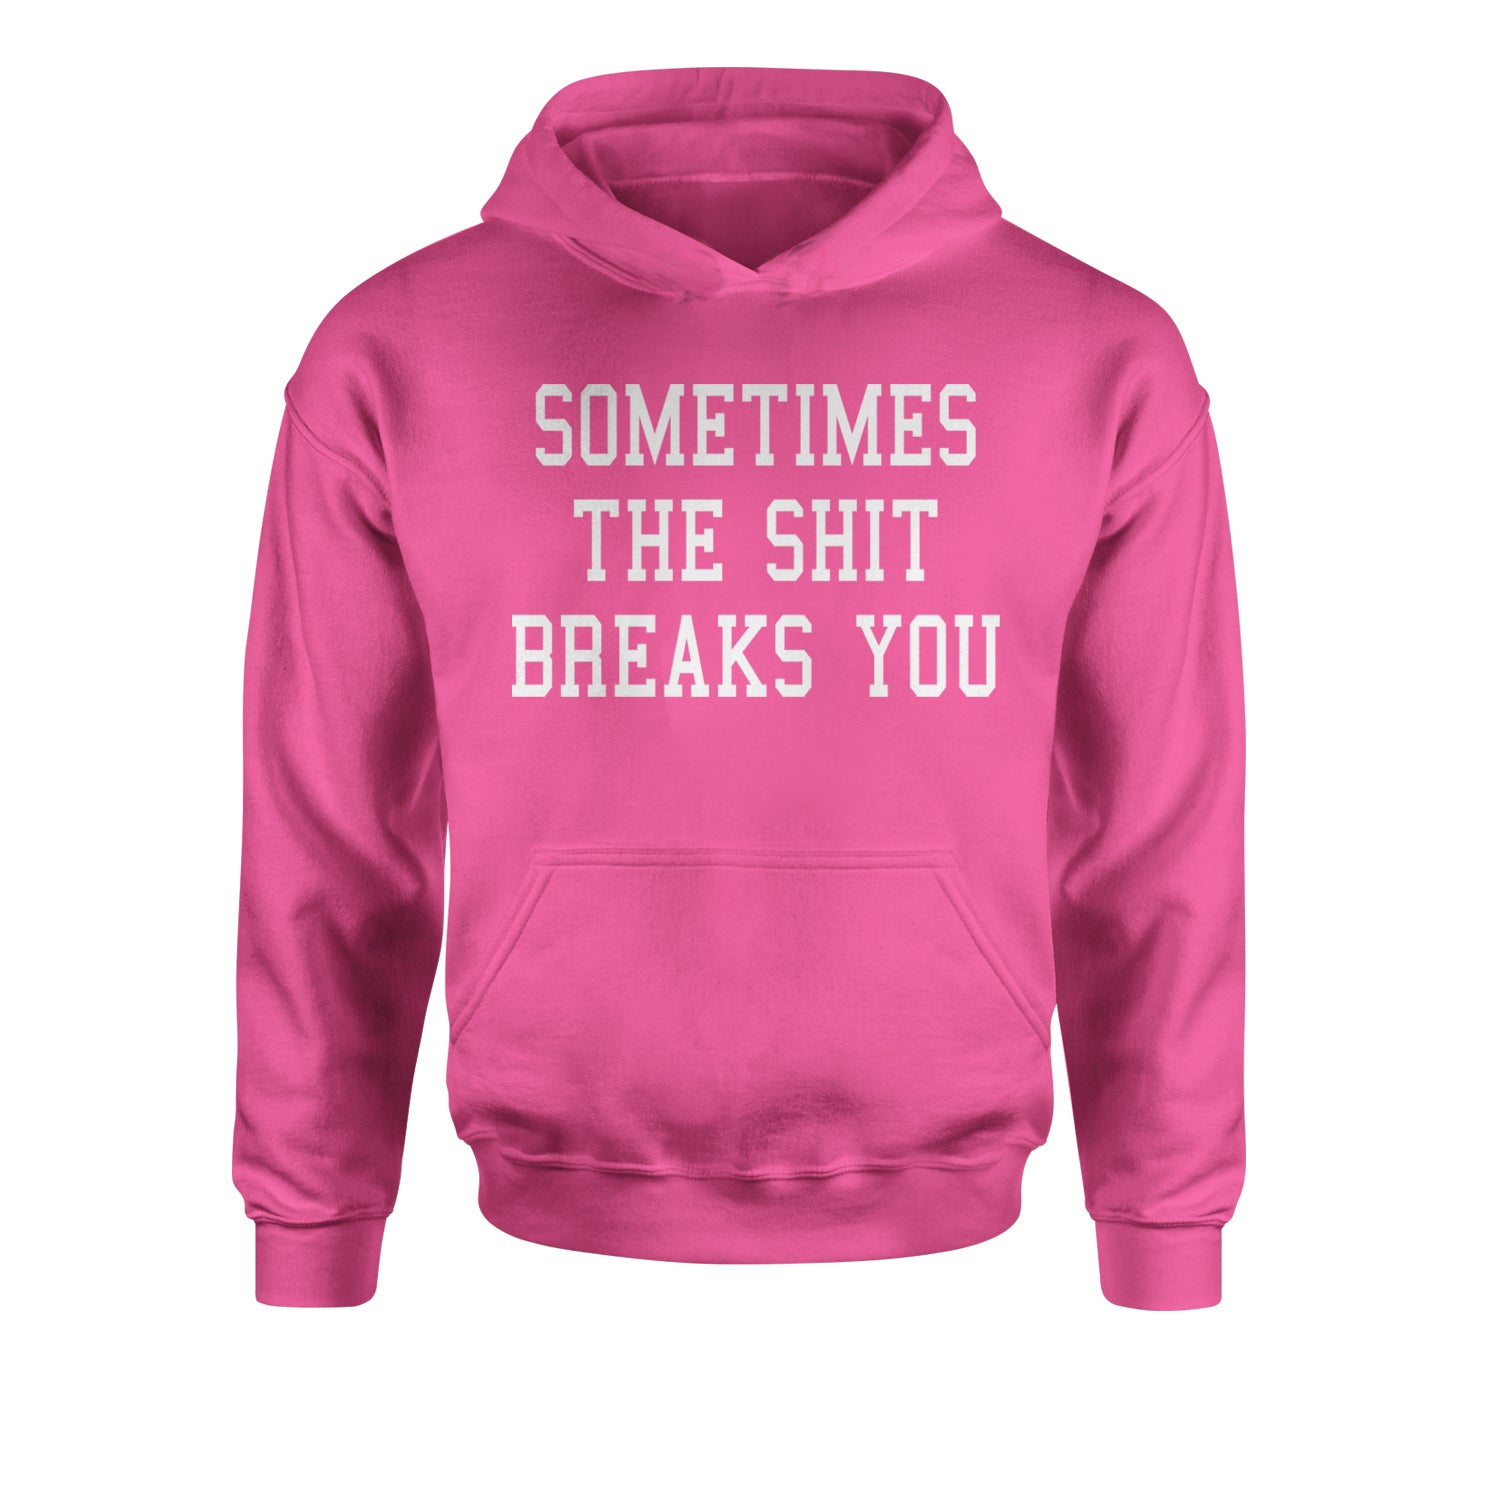 Sometimes The Sh-t Breaks You Youth-Sized Hoodie china, chinese, funny, in, man, meme, observed, shanghai, shirt by Expression Tees